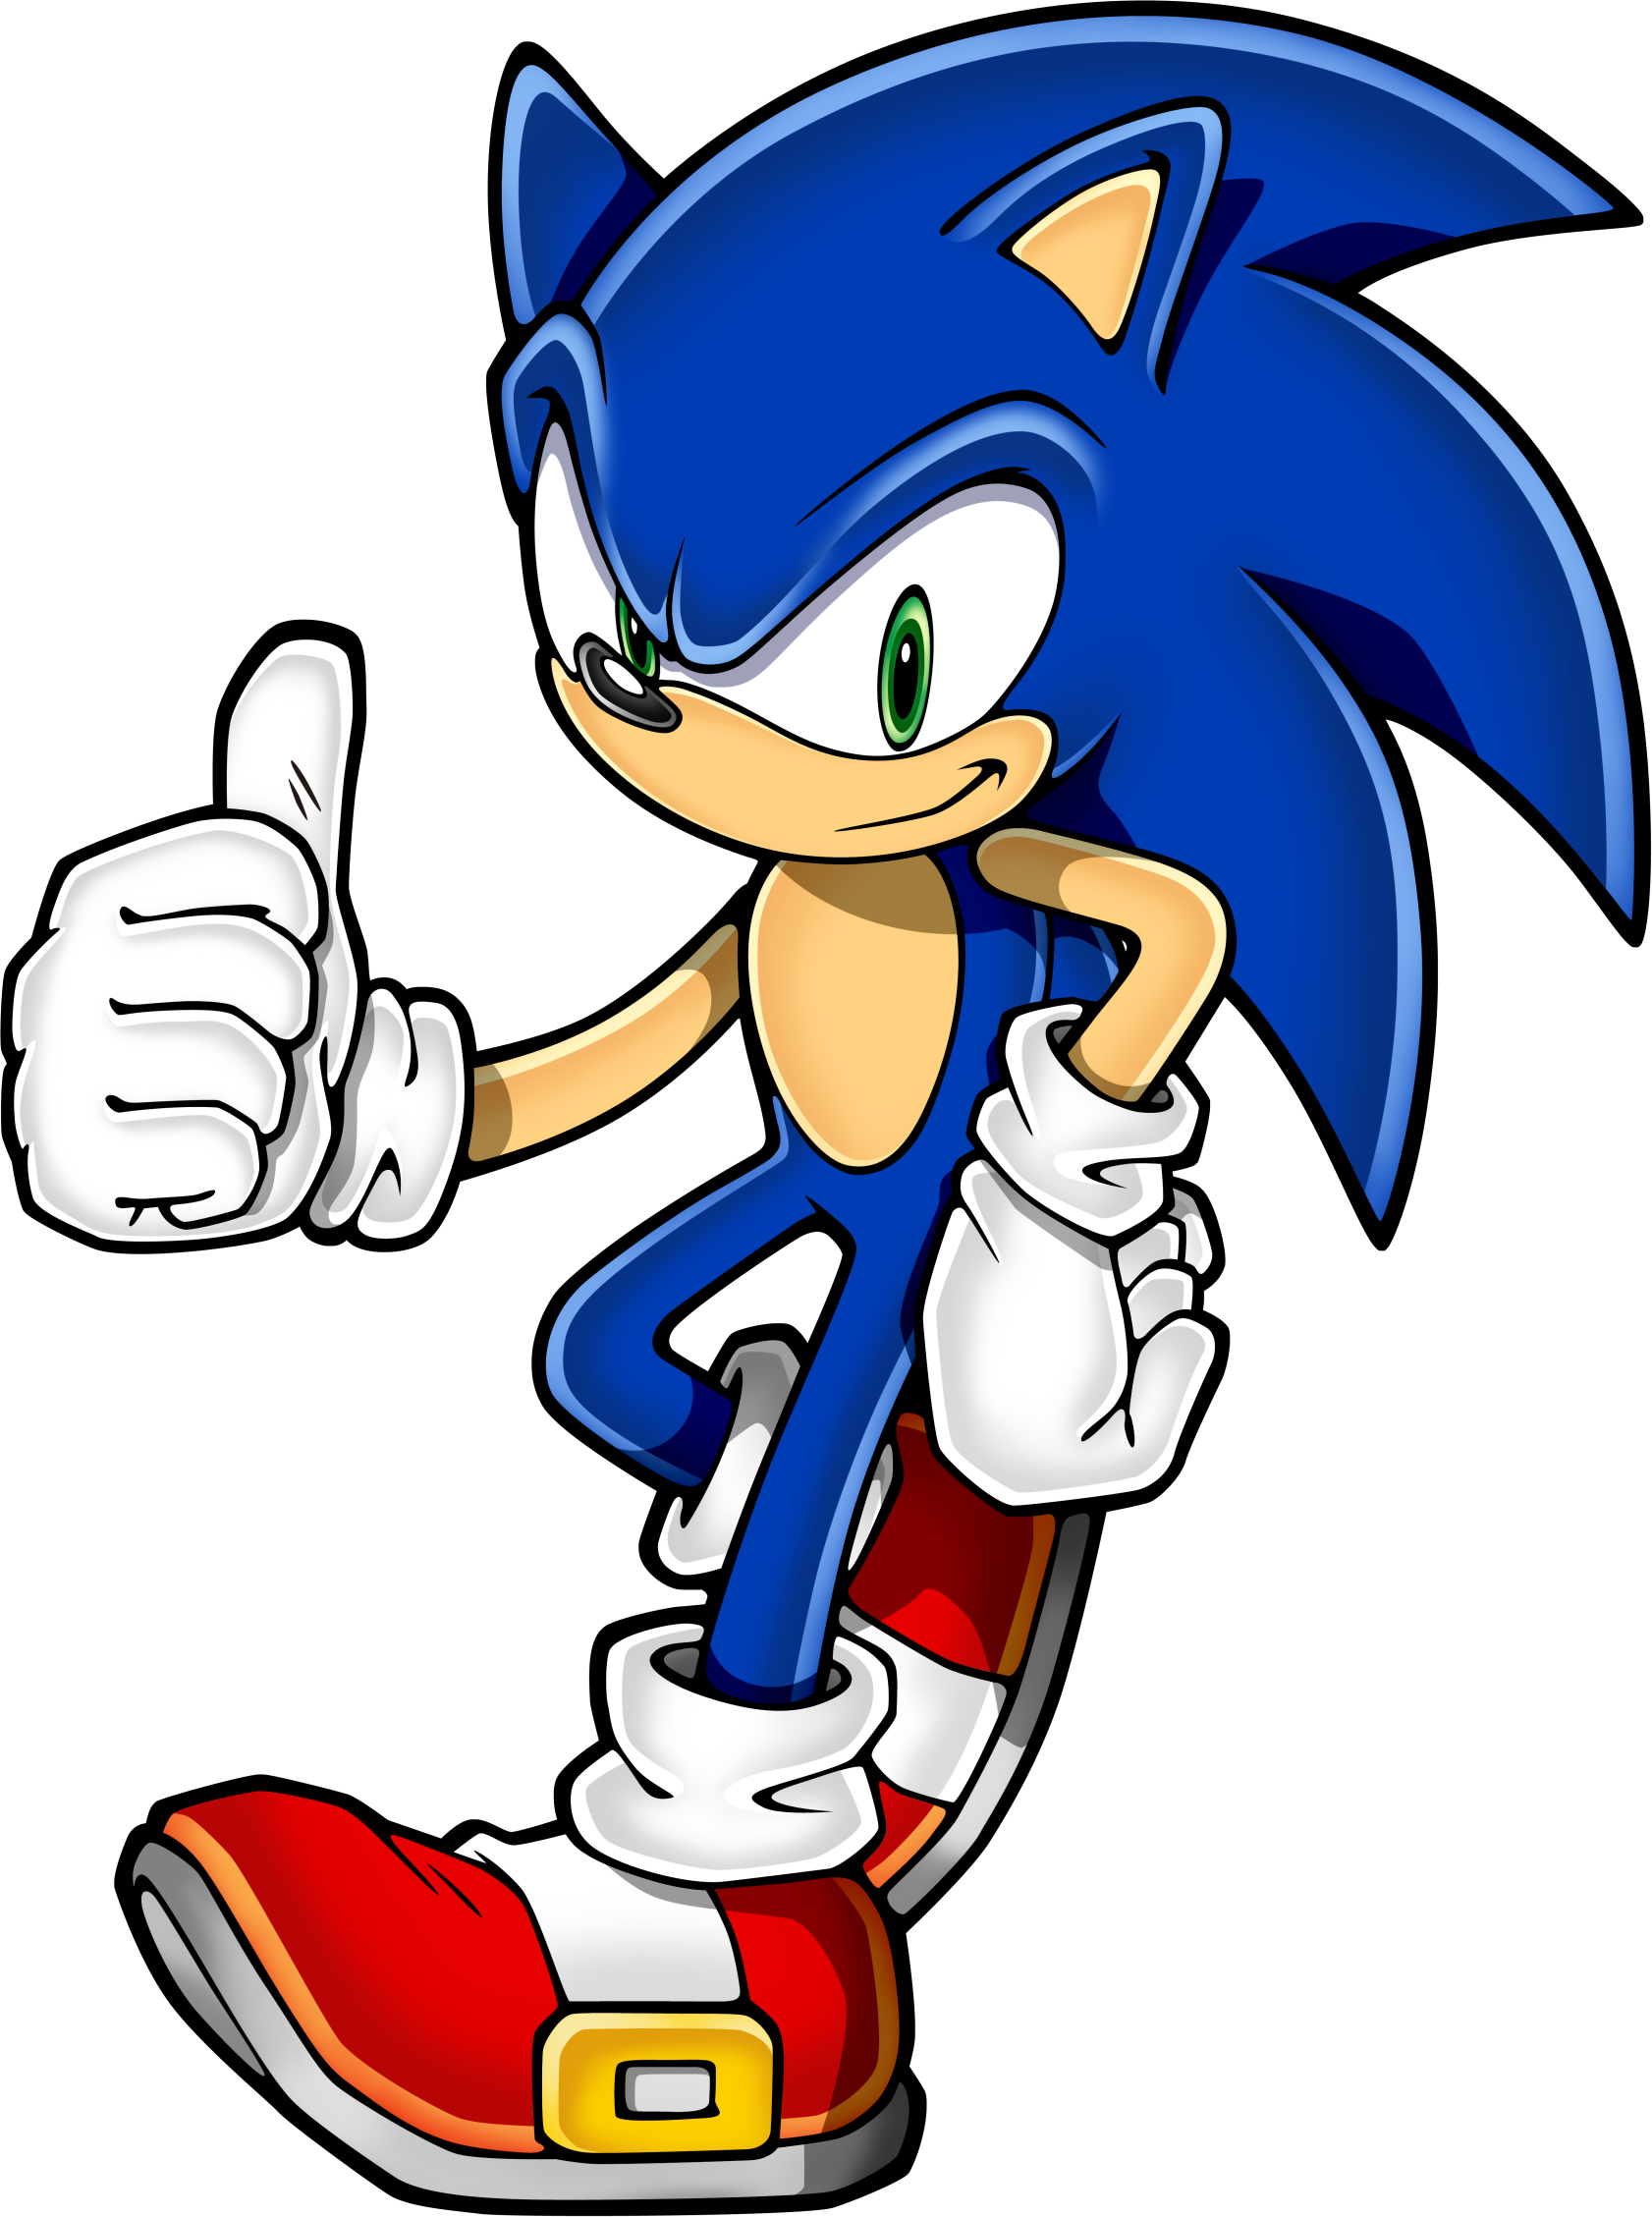 Sonic The Hedgehog Png - Image   Sonic Art Assets Dvd   Sonic The Hedgehog   6.png | Sonic News Network | Fandom Powered By Wikia, Transparent background PNG HD thumbnail